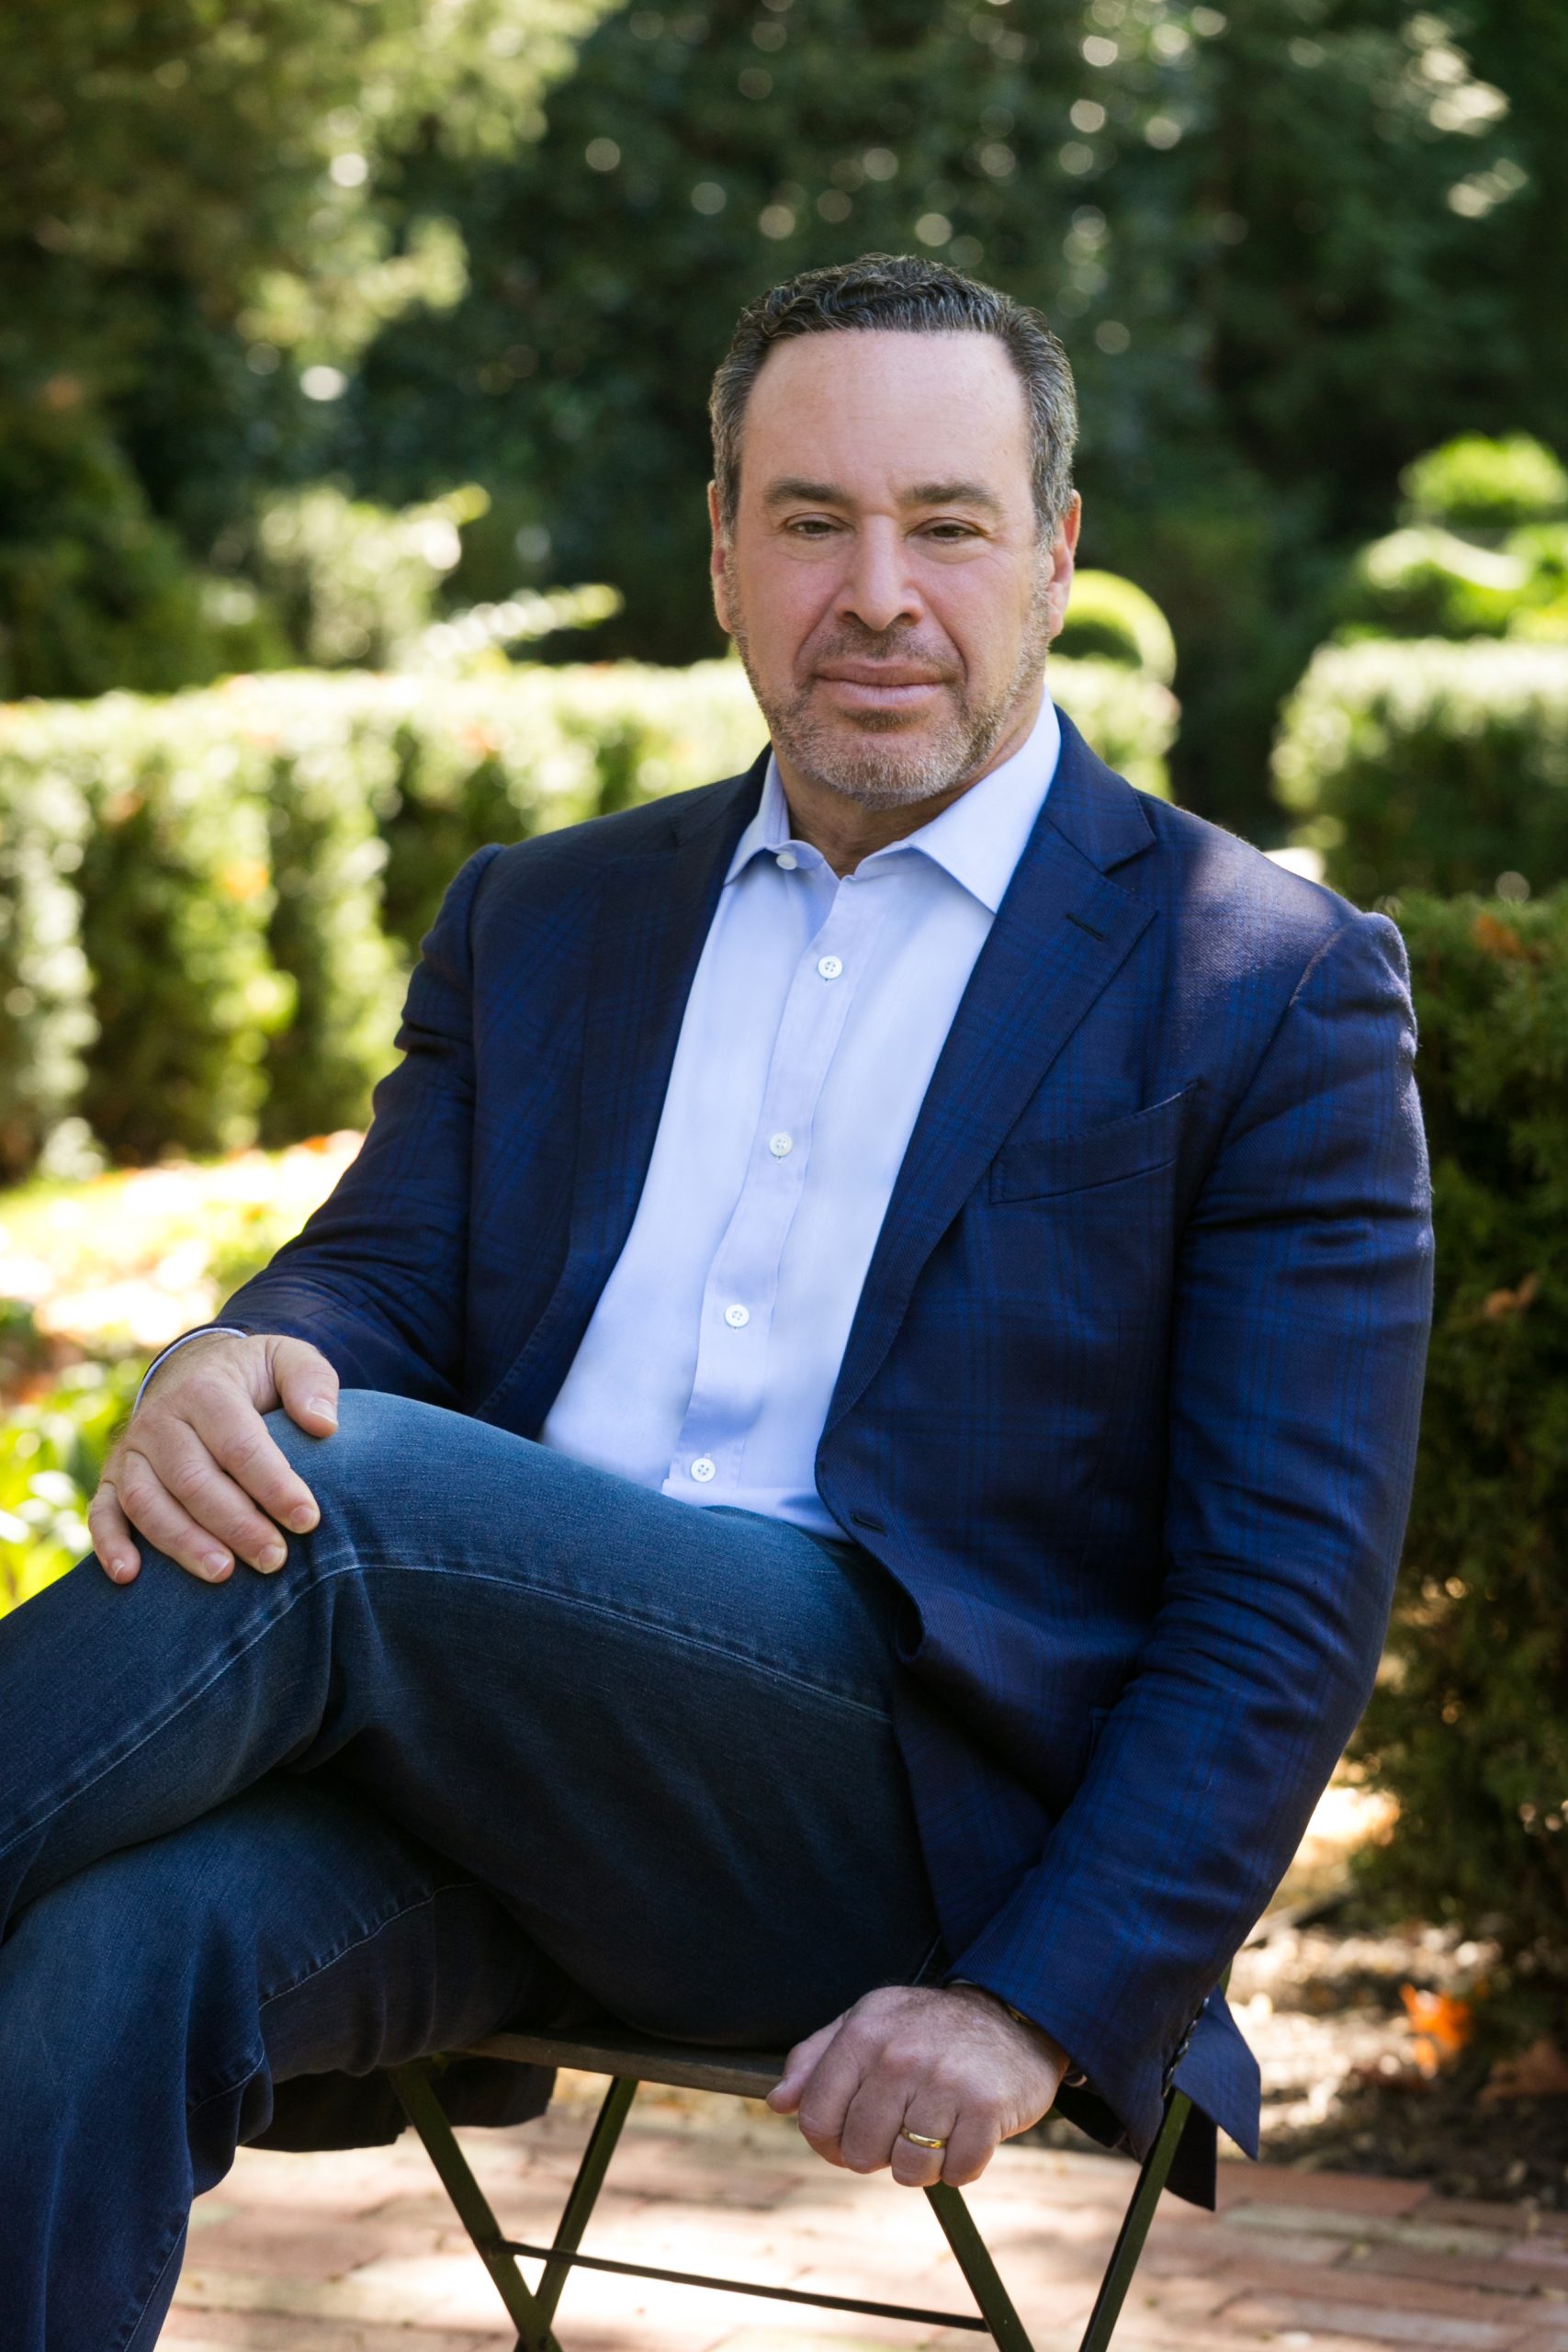 Can America Be Trusted Again? An Evening with David Frum '82